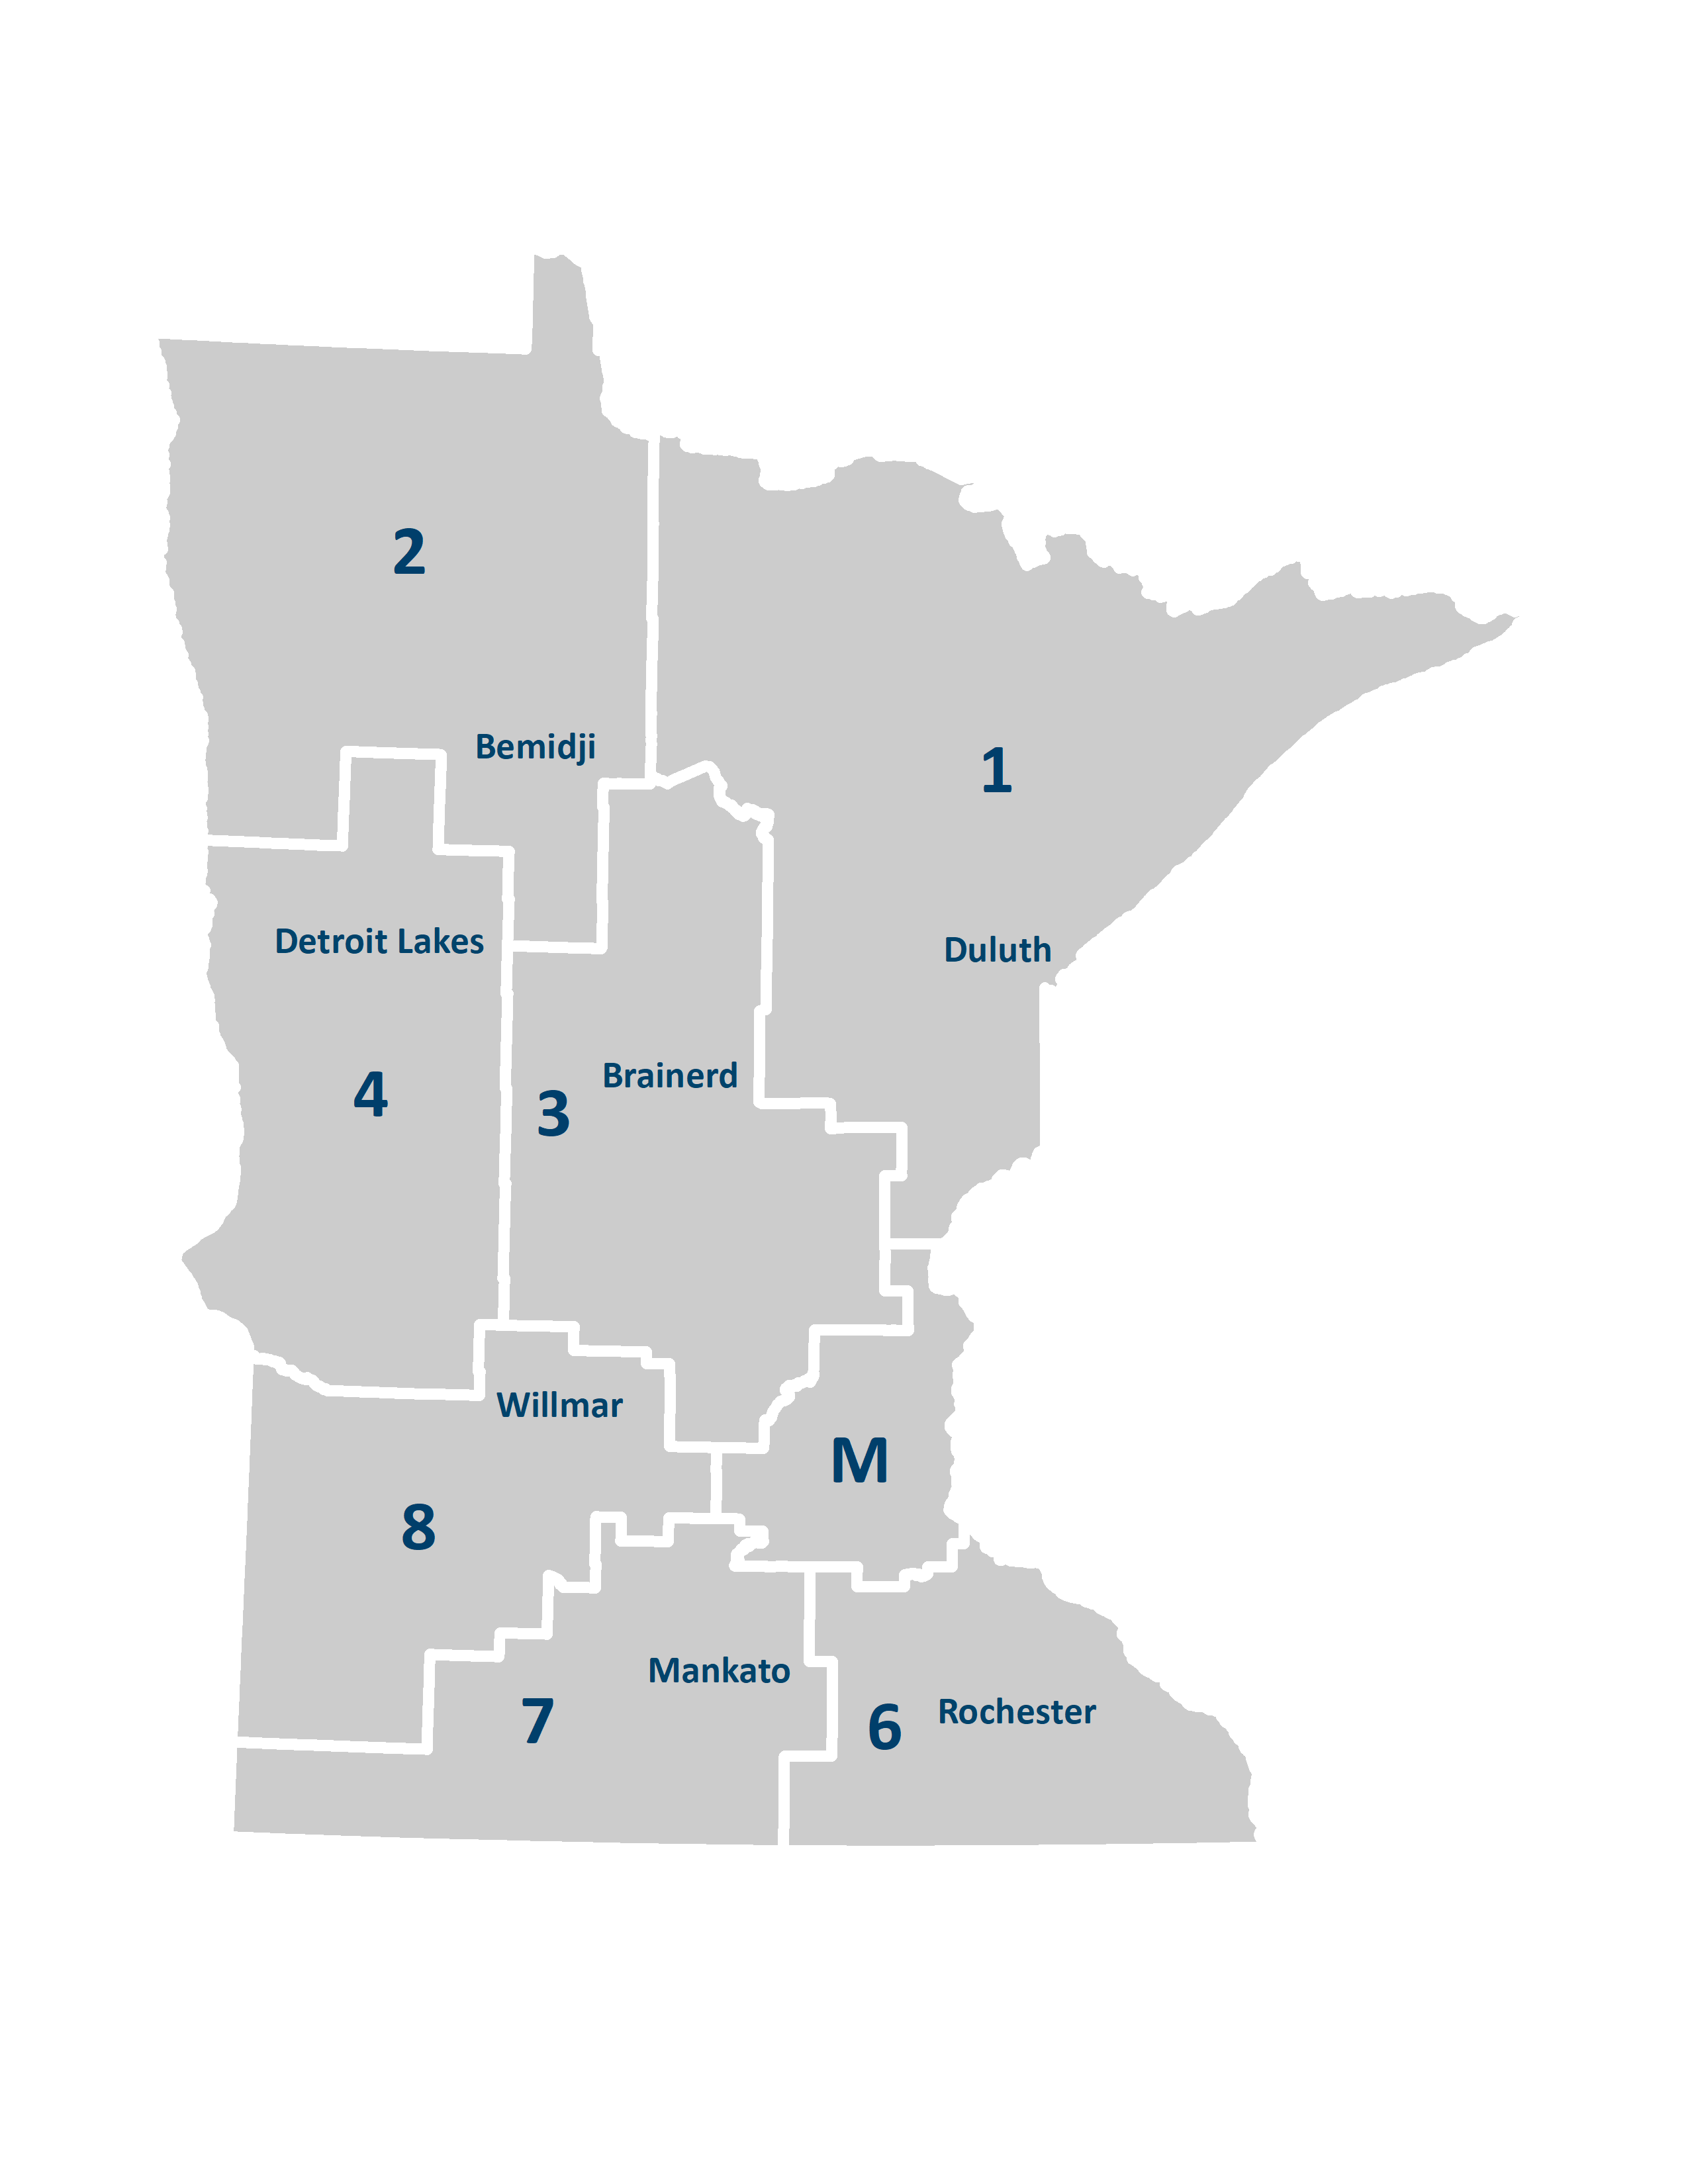 Breakdown and boundaries of MnDOT districts